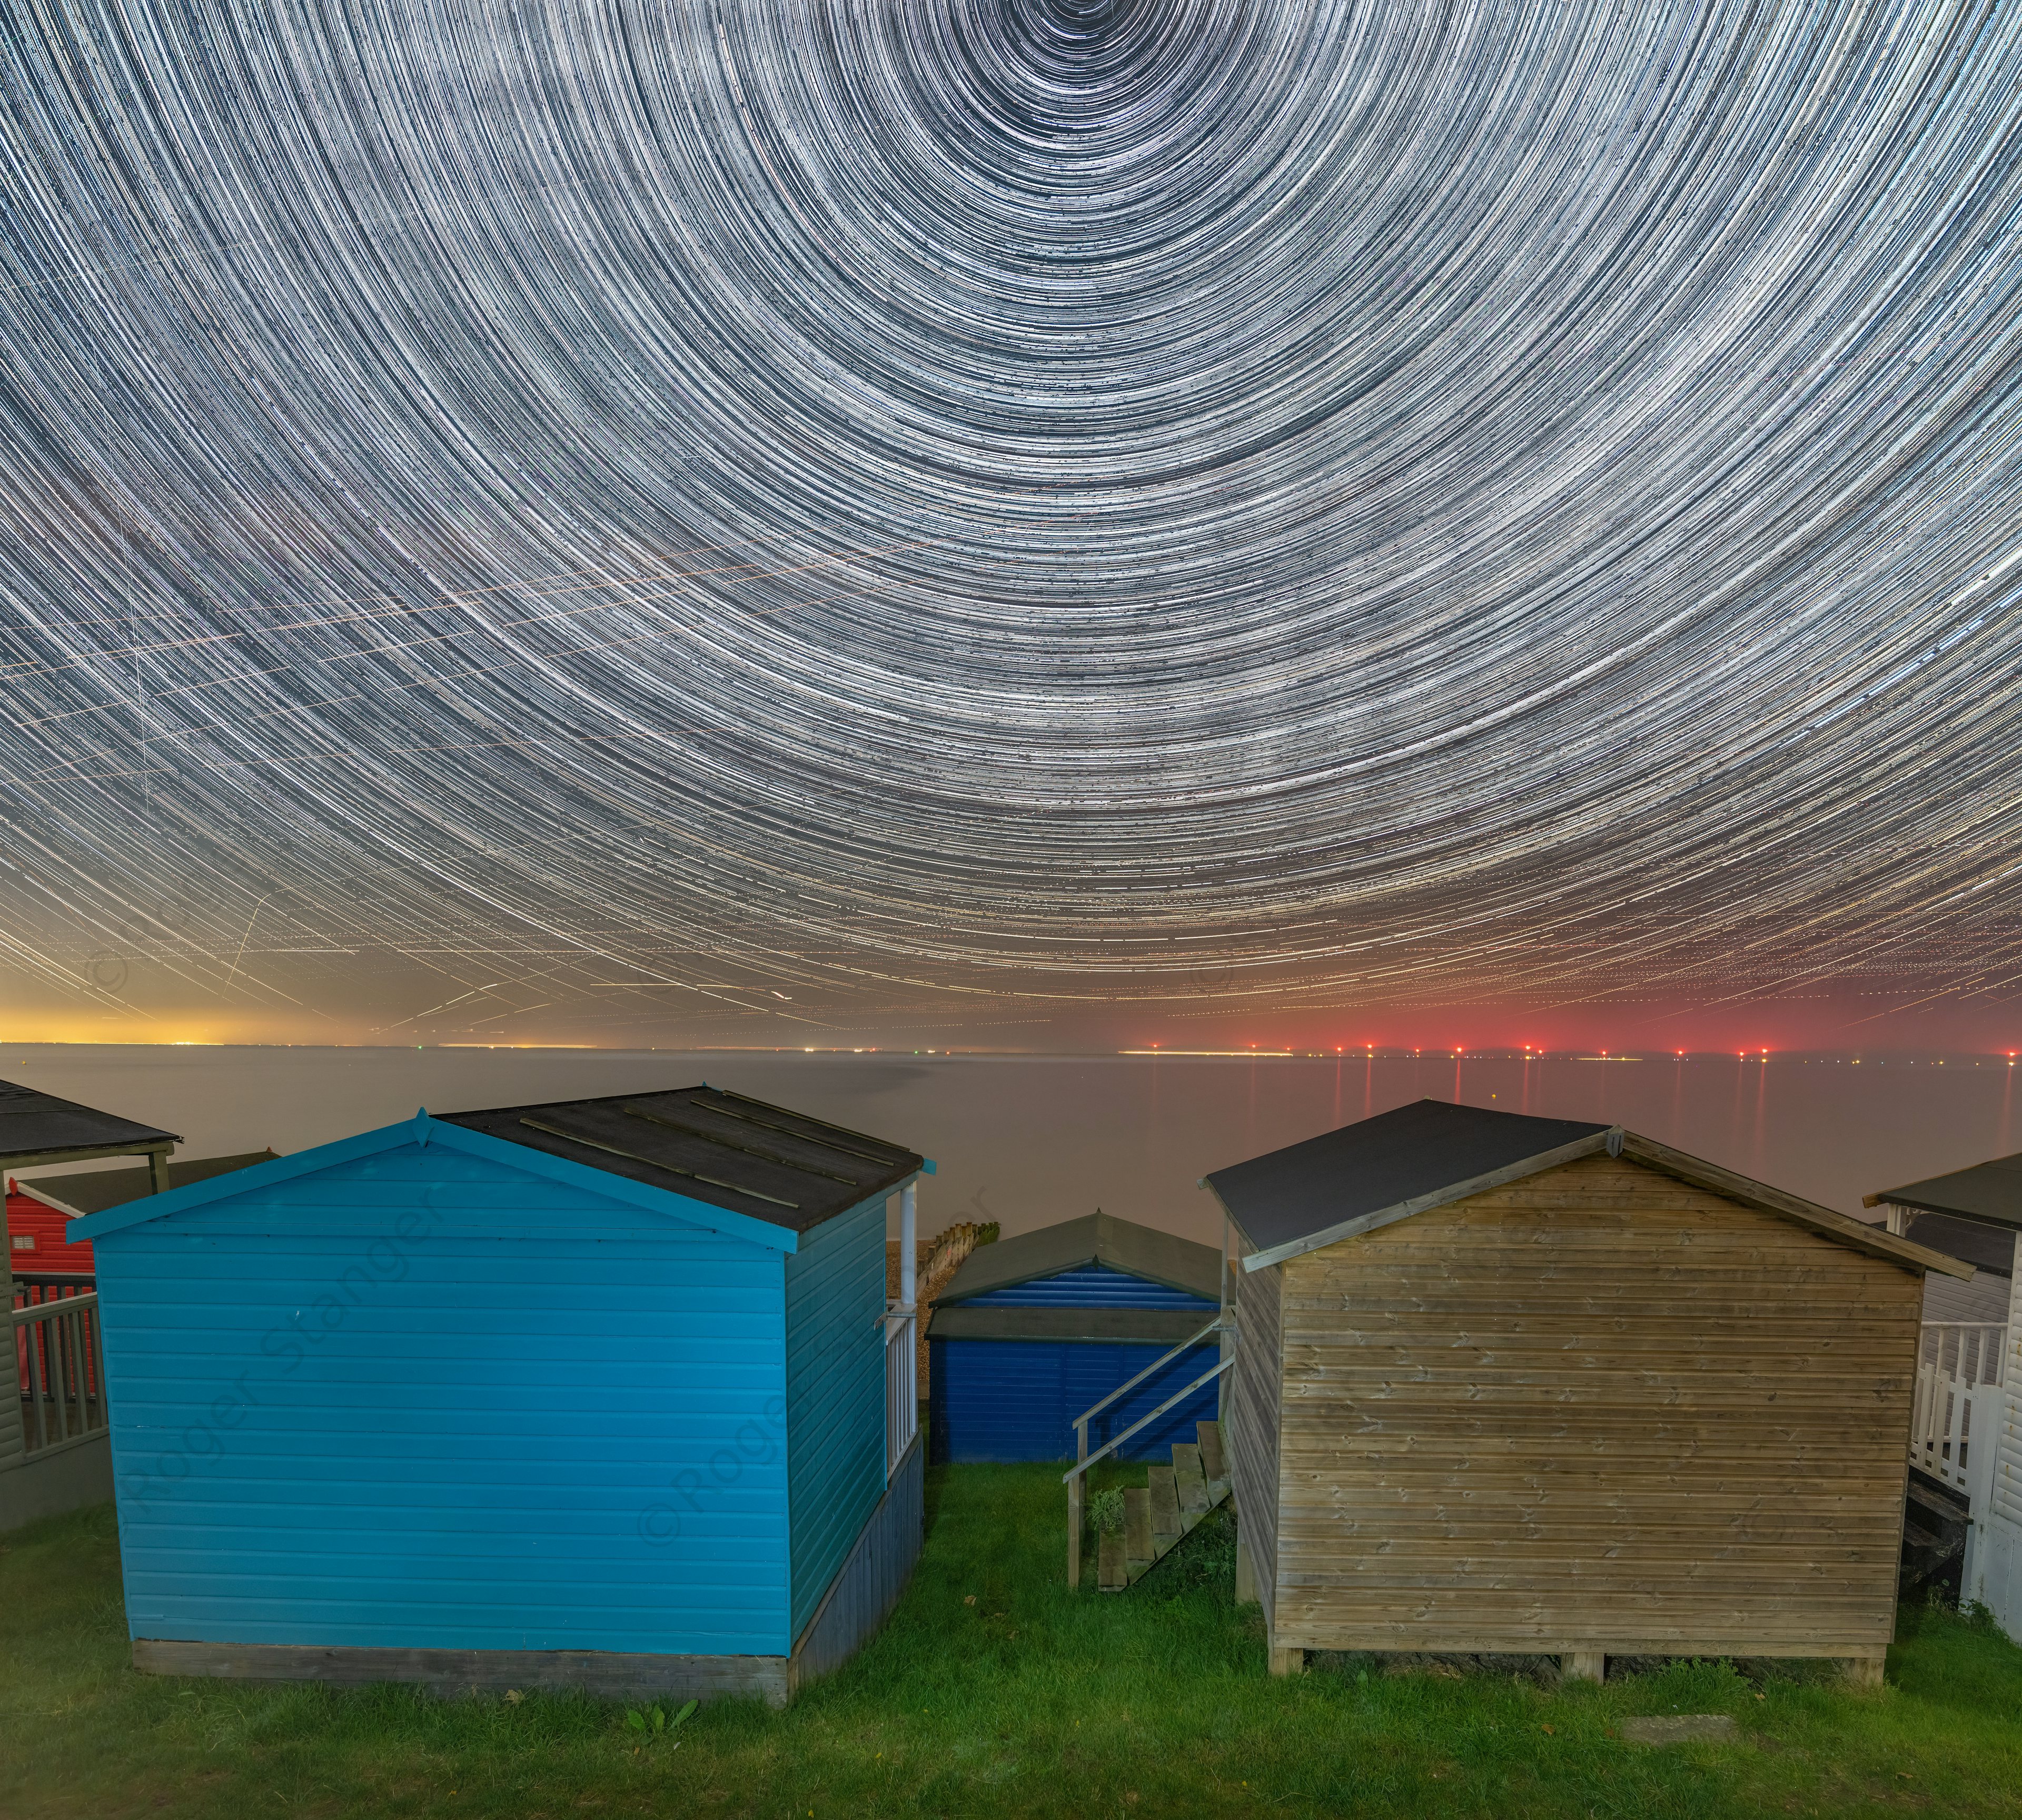 Tankerton Star Trails  (please note this is 10 x 9 not 1:1 ratio)